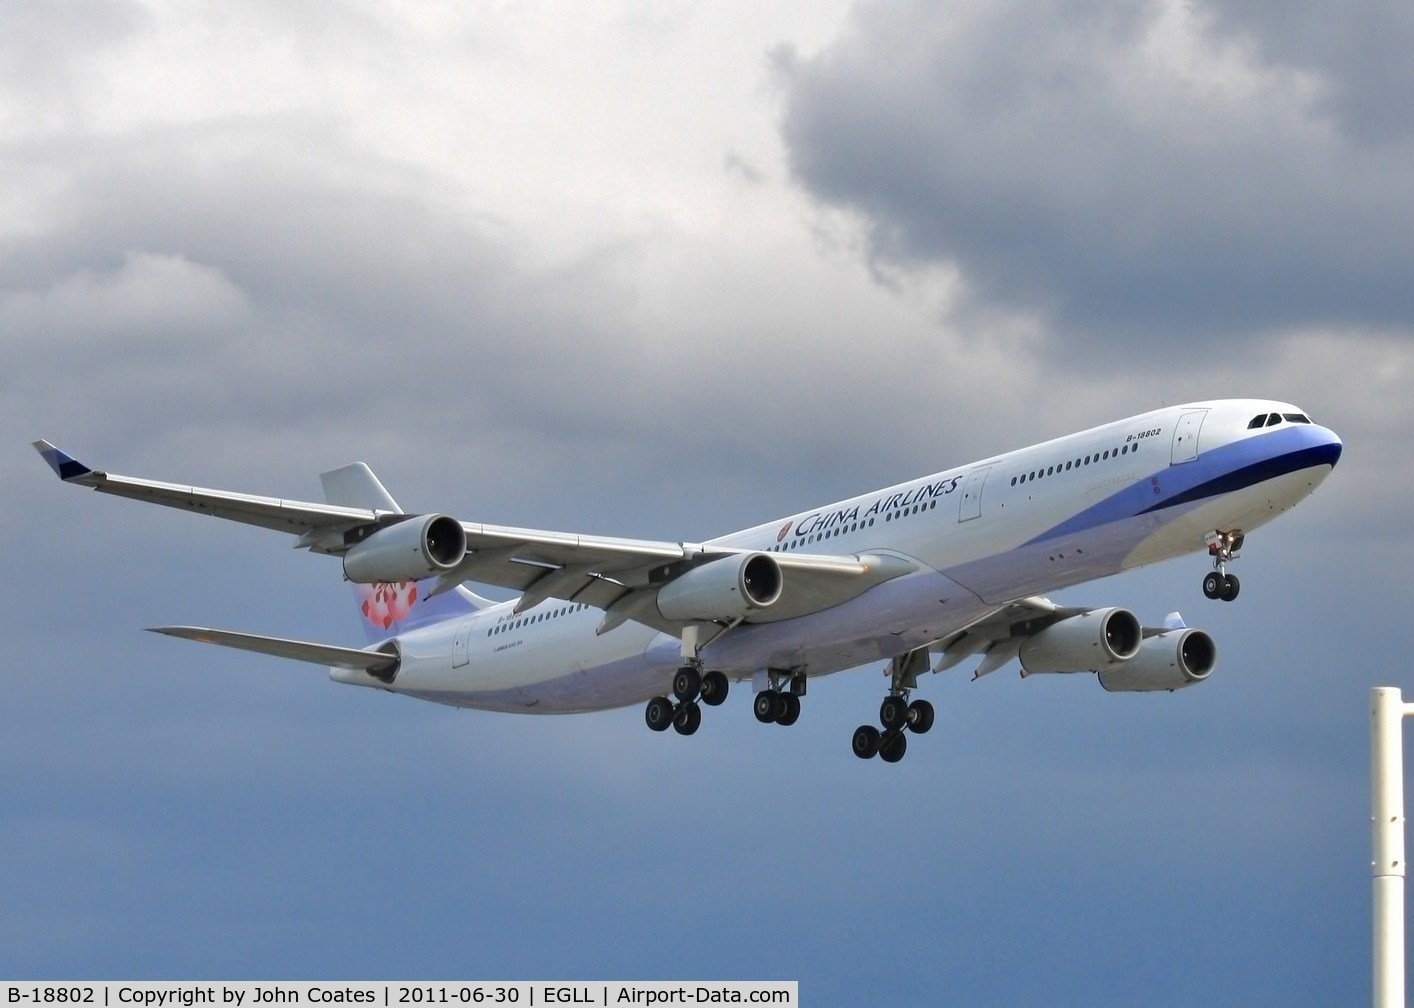 B-18802, 2001 Airbus A340-313X C/N 406, On approach to 27R